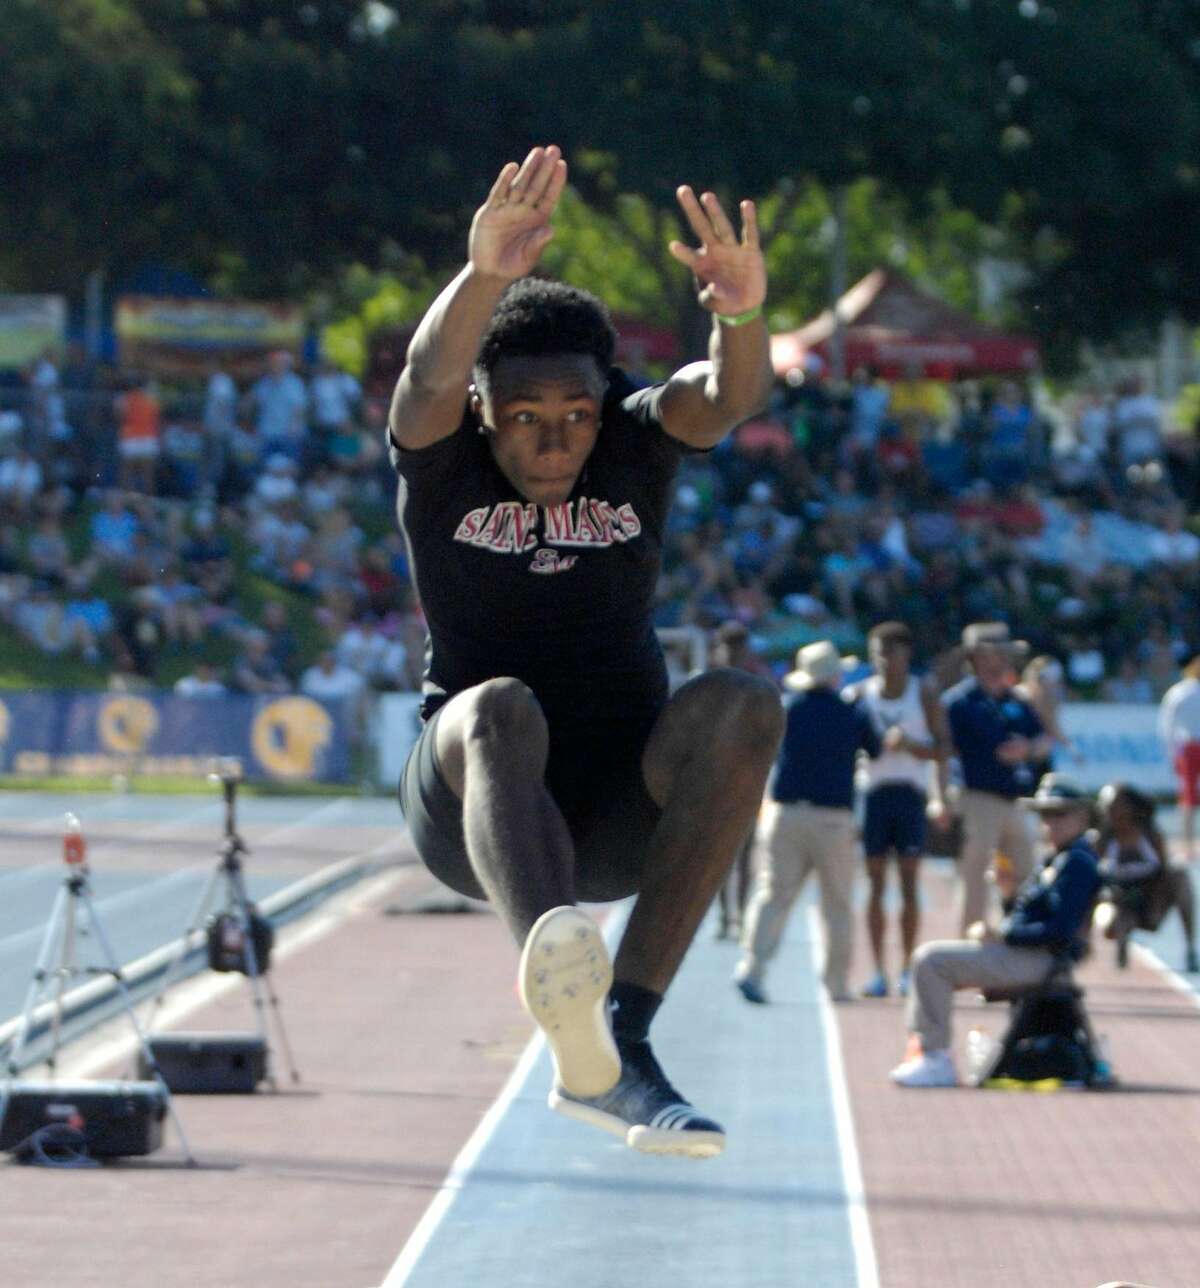 St. Mary's-Berkeley sophomore Malcolm Clemons won the boys long jump in wind-aided 25-1 at the CIF Track and Fields Championships in Clovis on Saturday. Photo by Eric Taylor/1st String